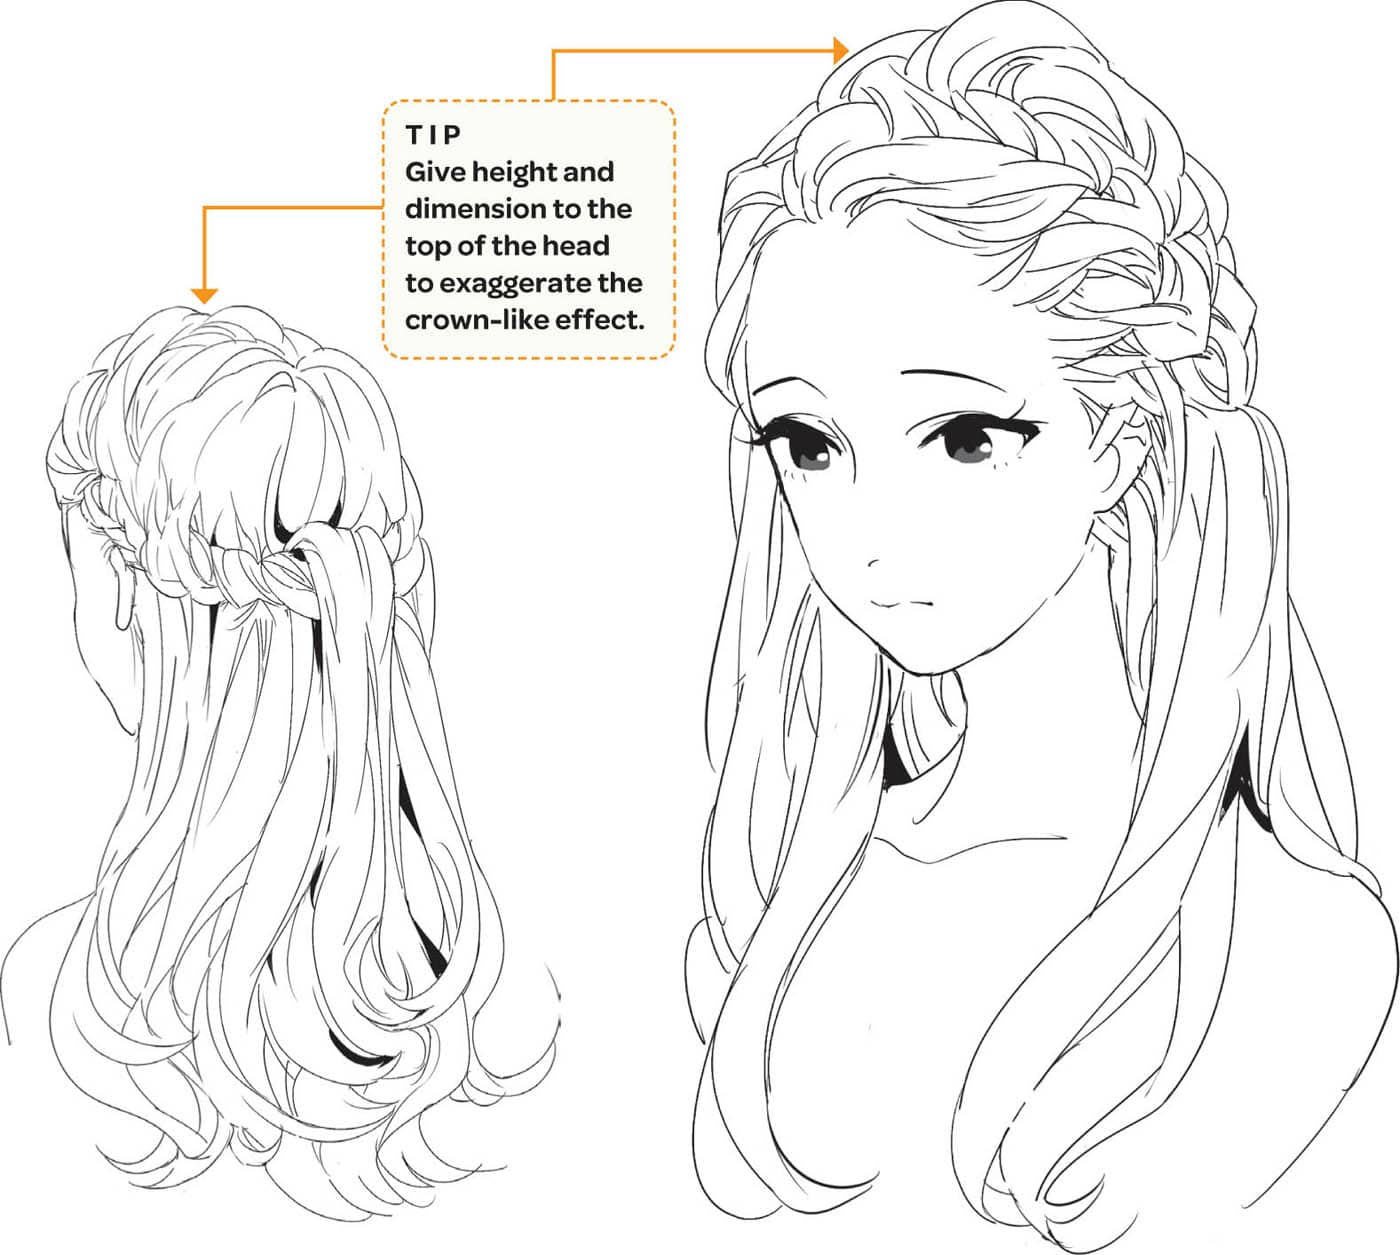 TIP Give height and dimension to the top of the head to exaggerate the crown-like effect.